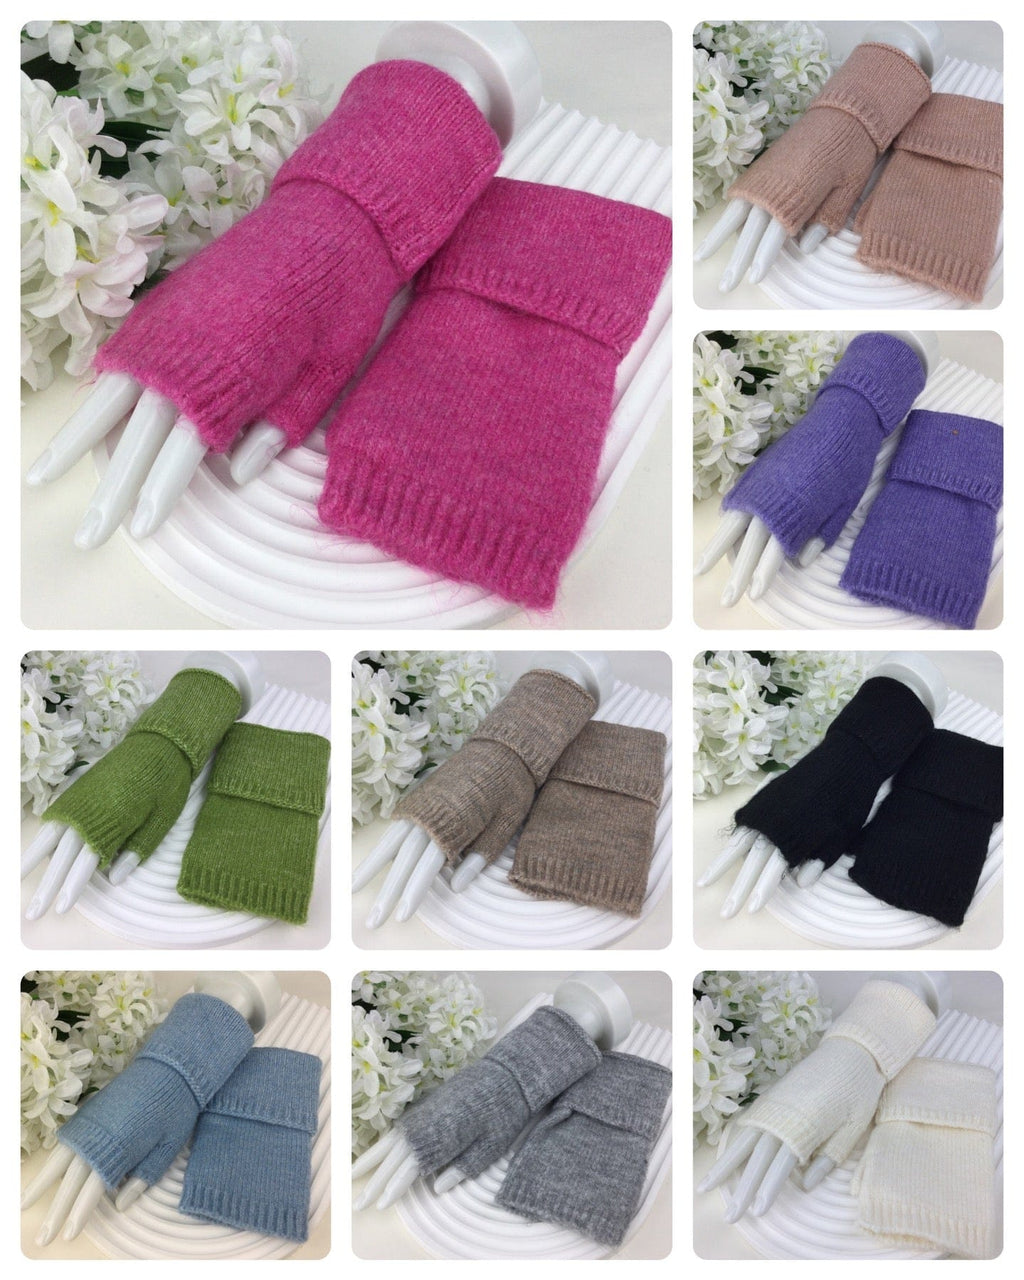 lusciousscarves Fingerless Gloves , Wrist Warmers available in 9 Colours.